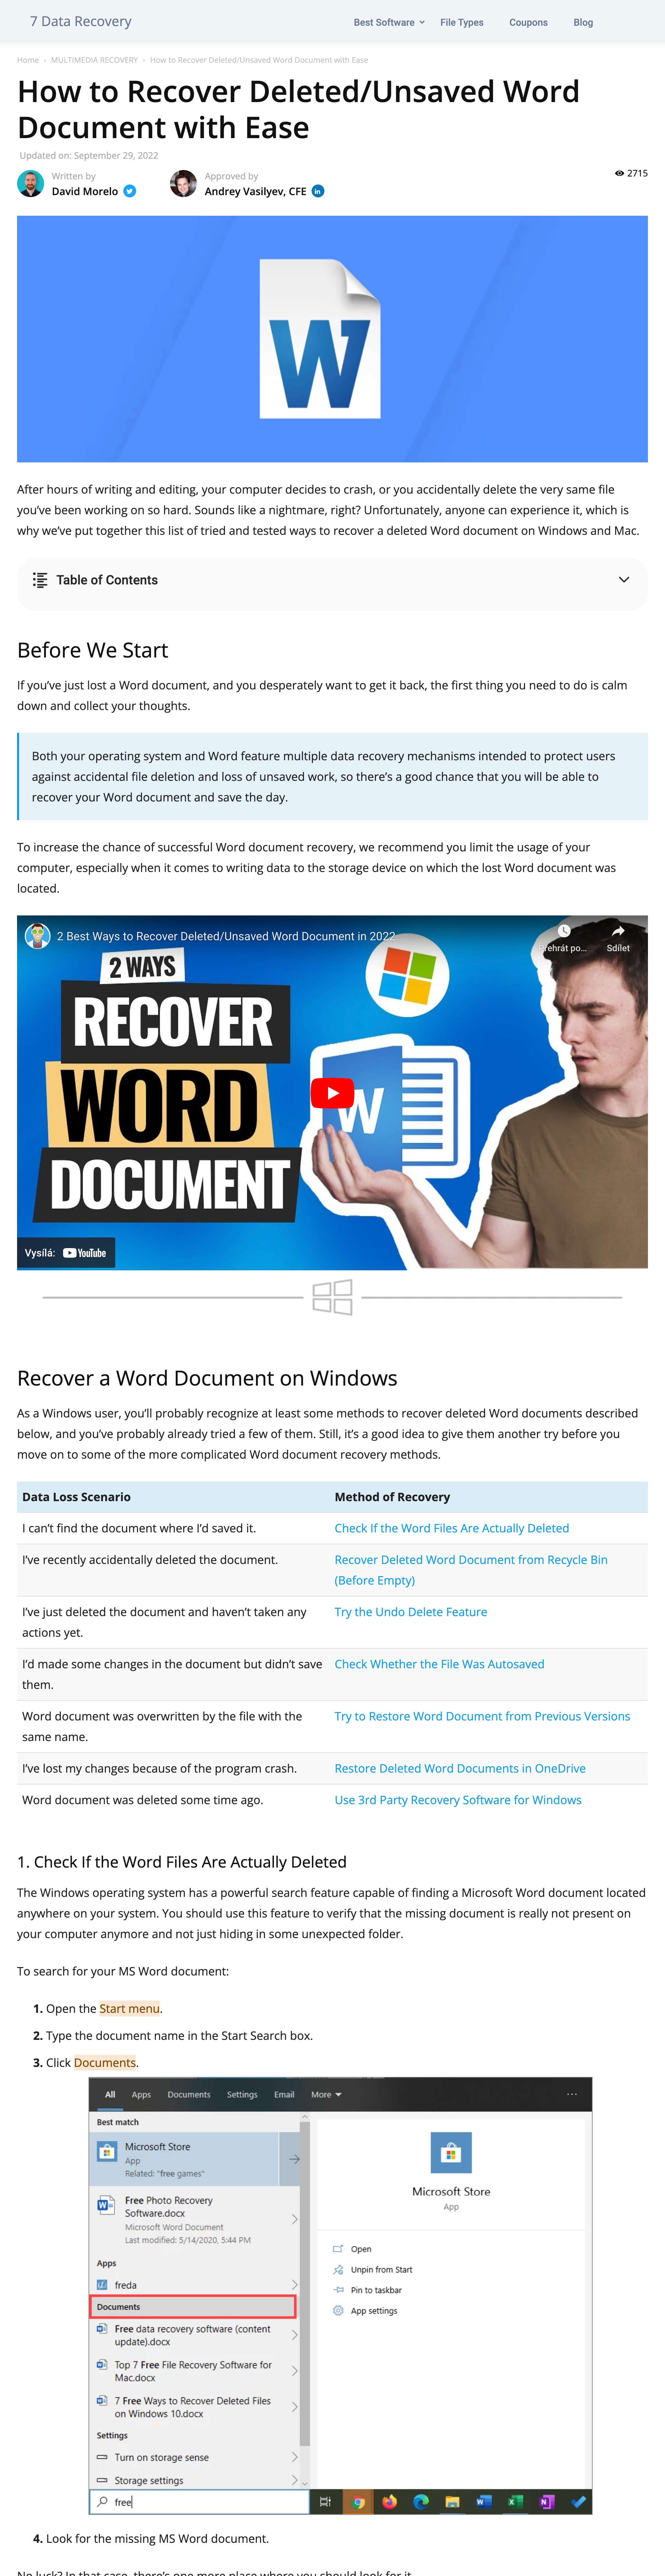 How to Recover Deleted/Unsaved Word Document with Ease
